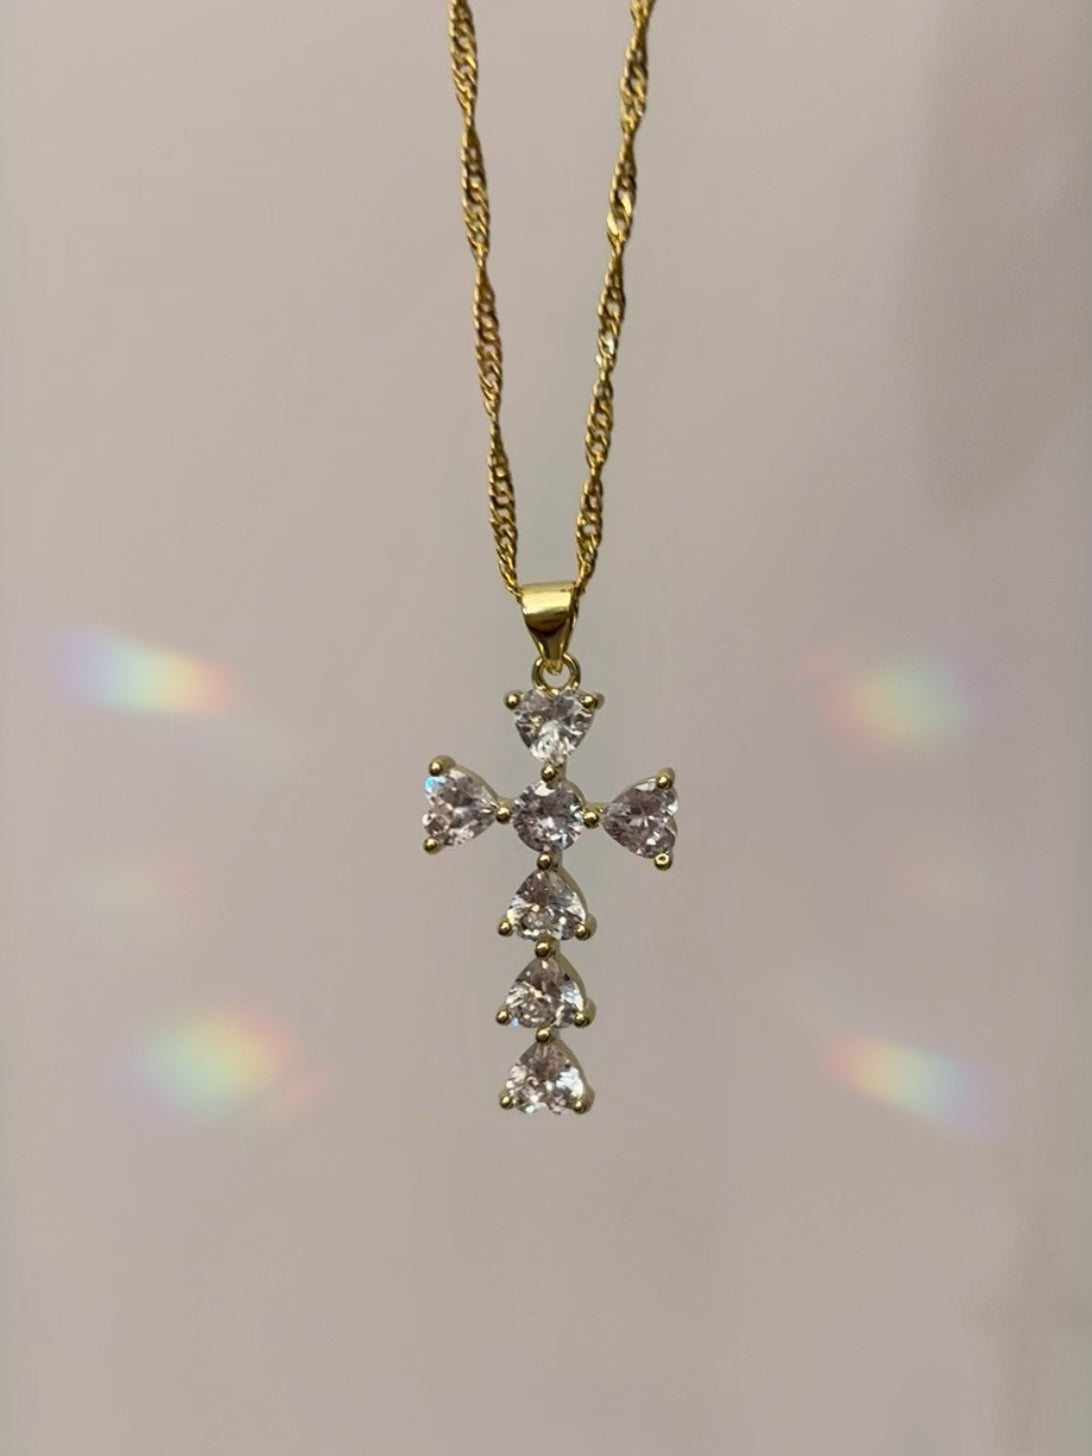 Sparkly cross necklace with cubic zirconia crystals and 14k gold filled. hypoallergenic lead and nickel free. 